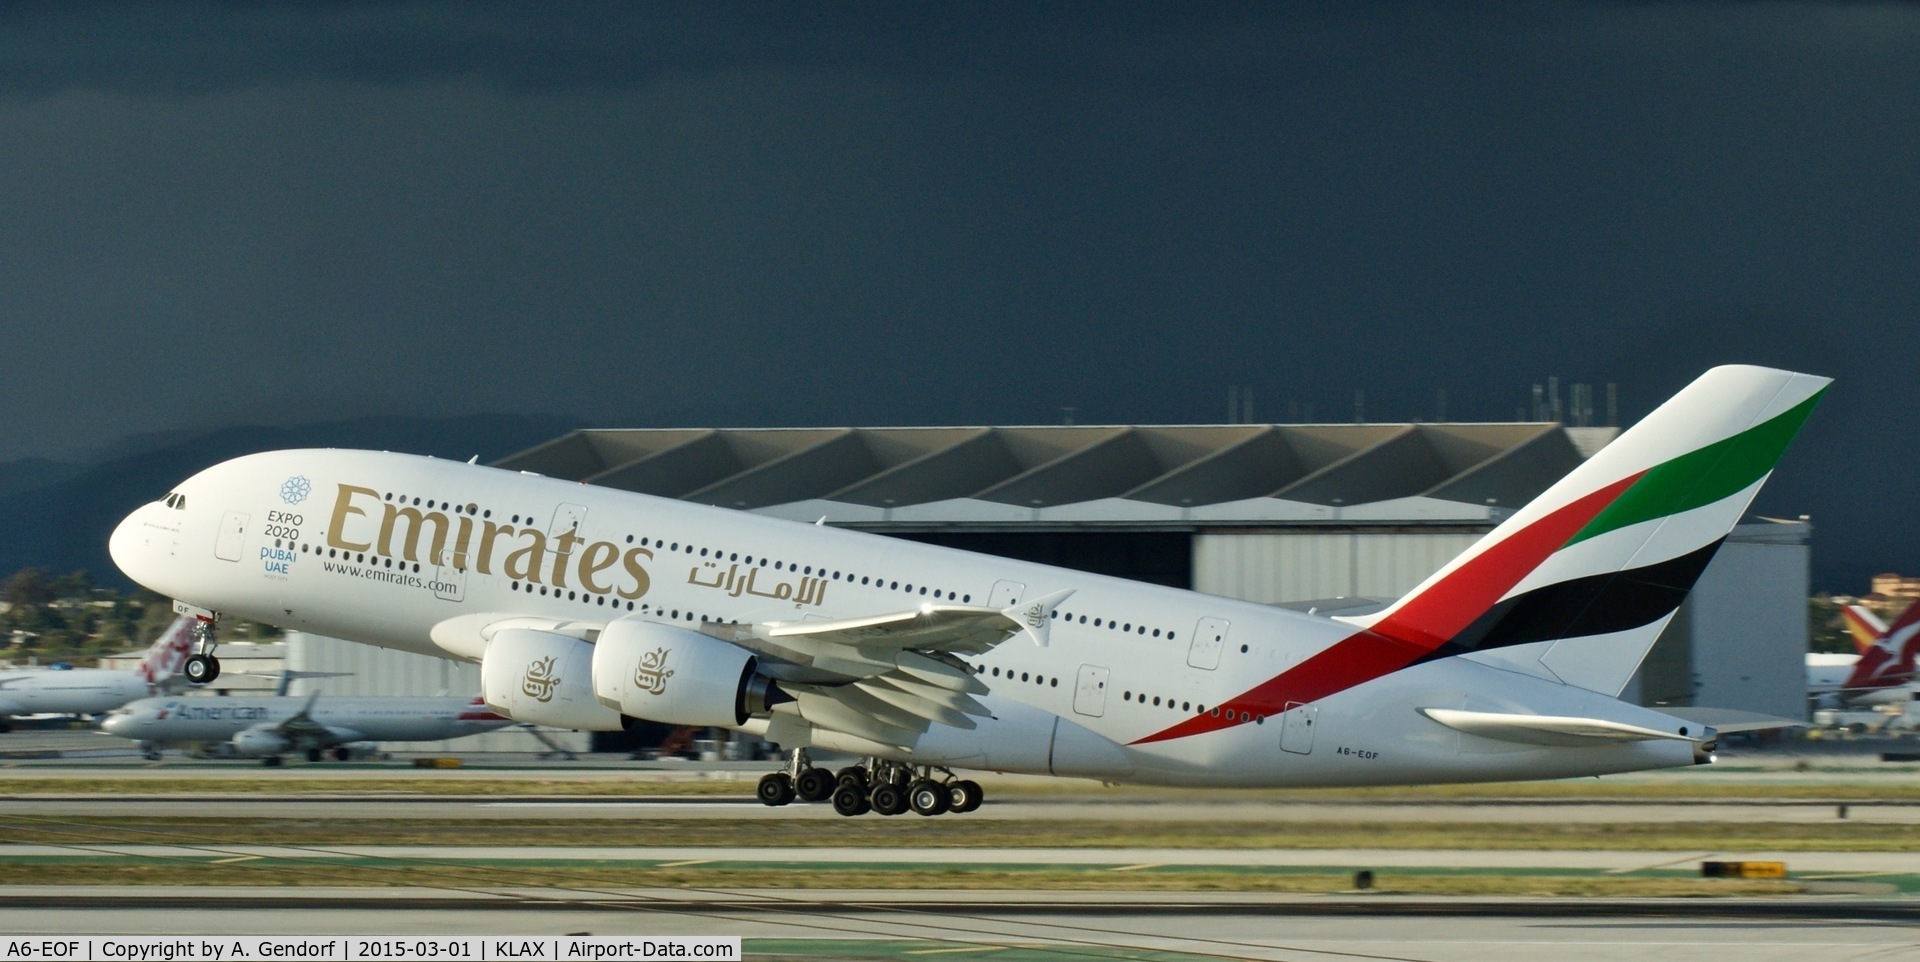 A6-EOF, 2014 Airbus A380-861 C/N 171, Emirates, is here taking off at Los Angeles Int'l(KLAX)